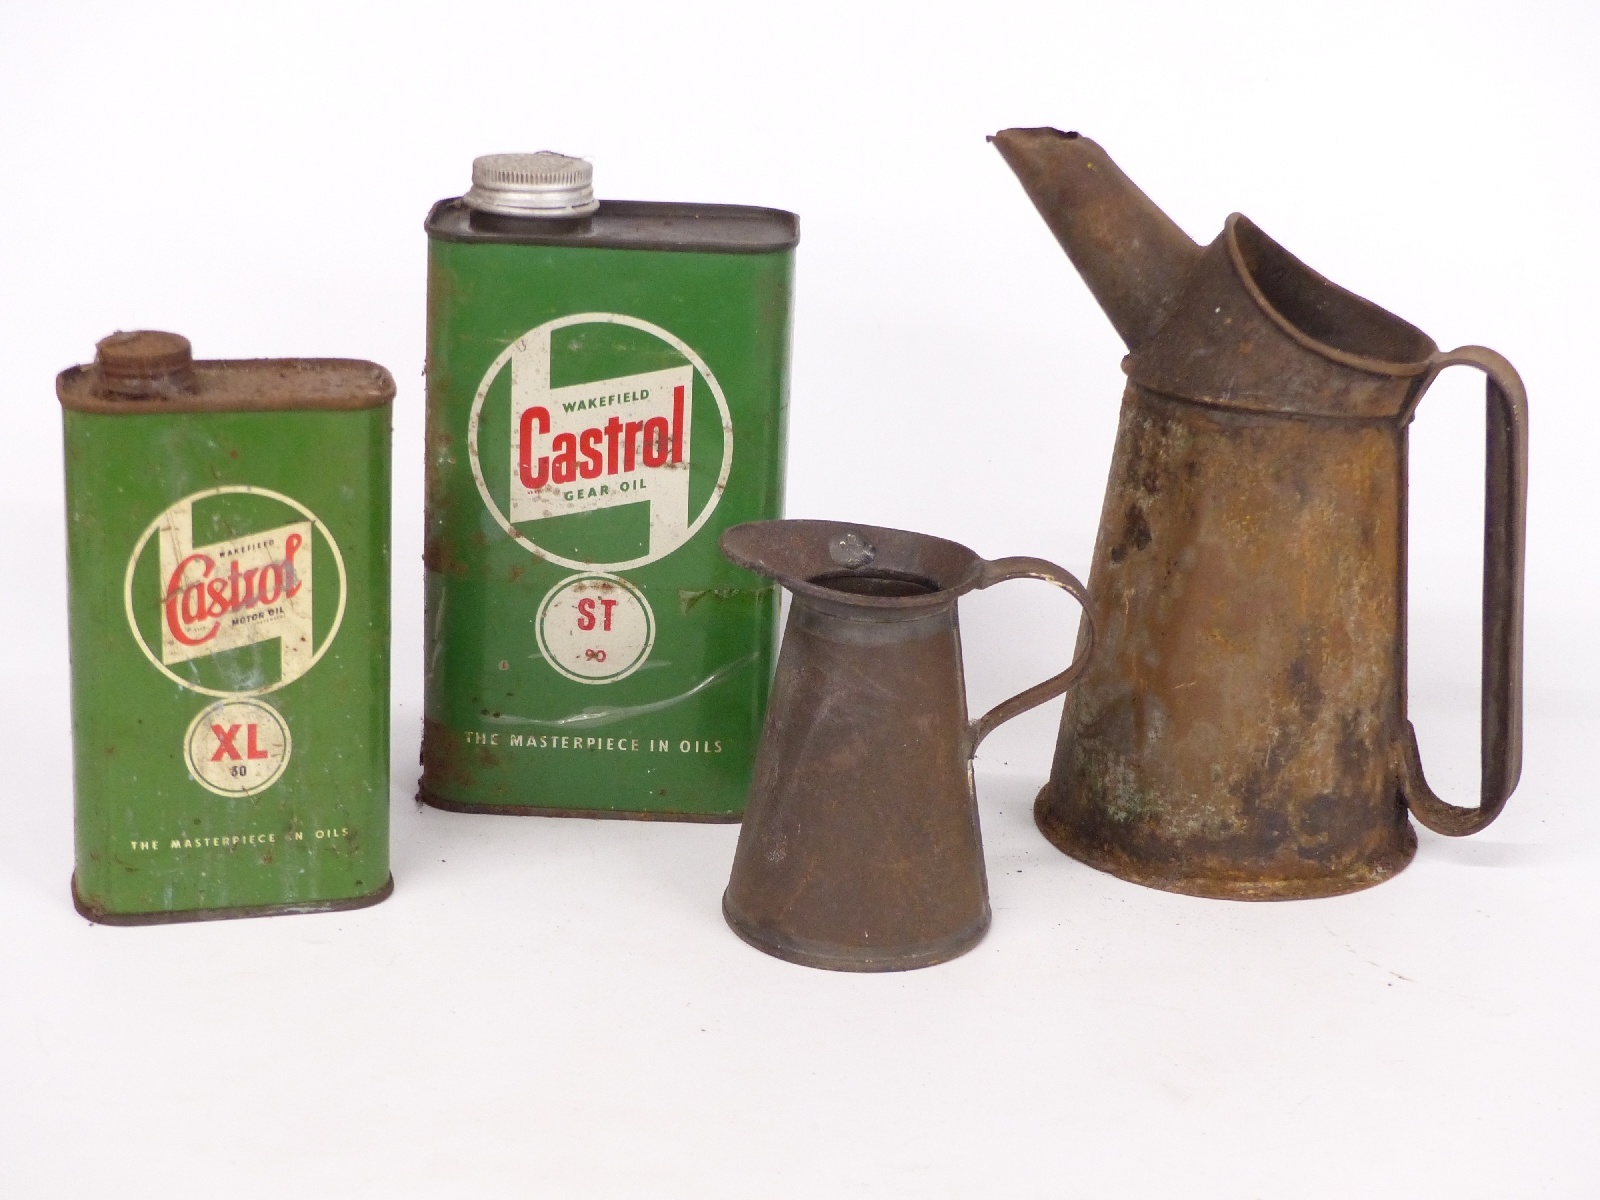 Two vintage garage oil cans and two Castrol oil cans, one XL motor oil the other ST 90 gear oil